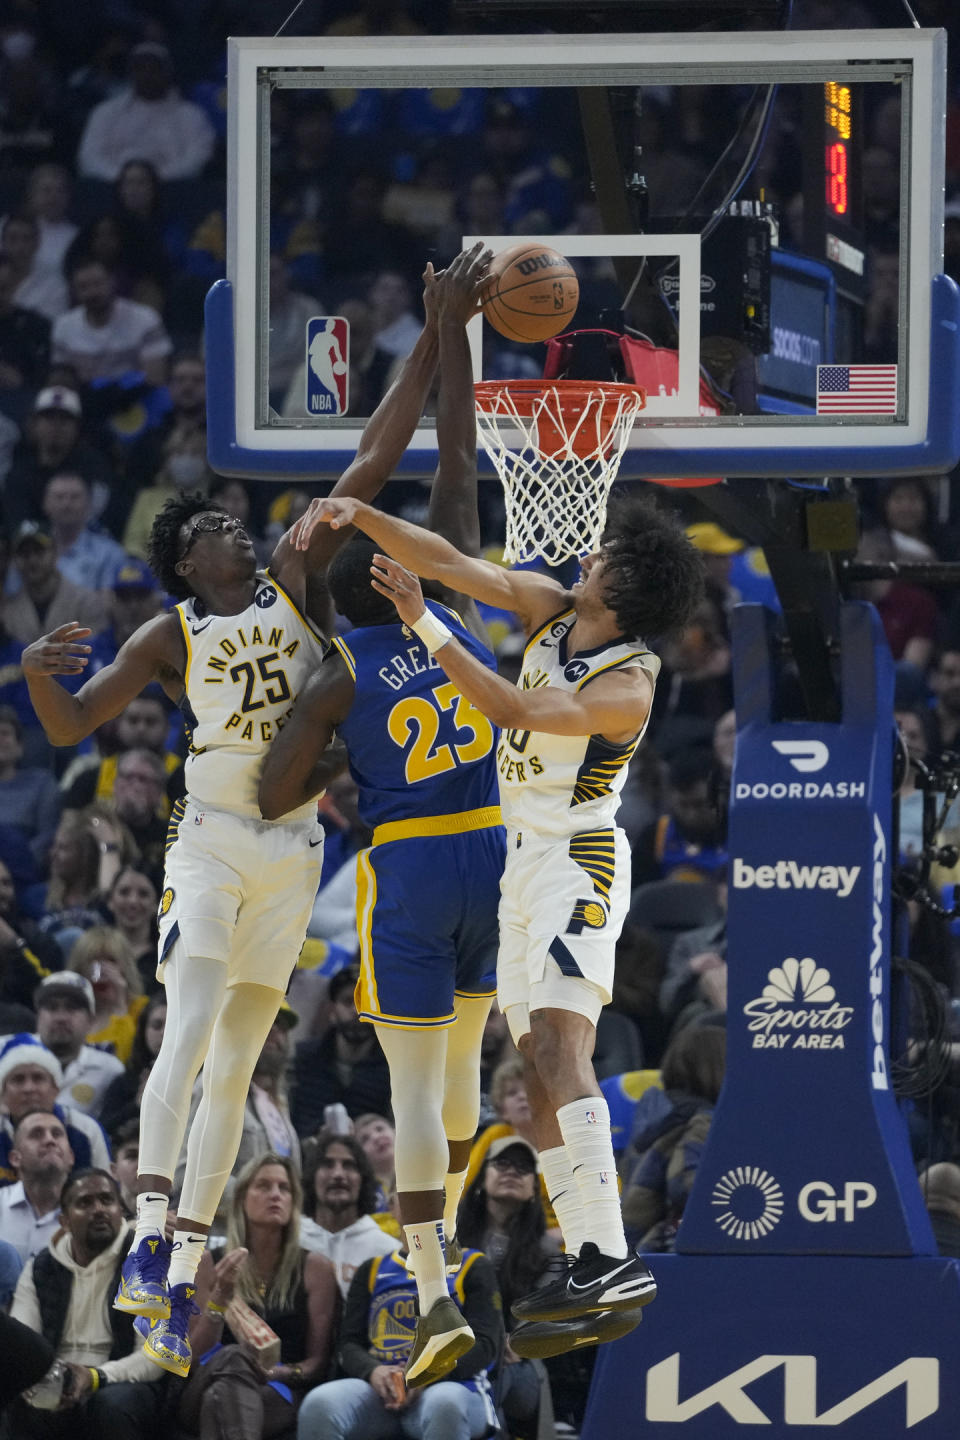 Indiana Pacers forward Jalen Smith (25) blocks a shot by Golden State Warriors forward Draymond Green (23) during the first half of an NBA basketball game in San Francisco, Monday, Dec. 5, 2022. (AP Photo/Godofredo A. Vásquez)